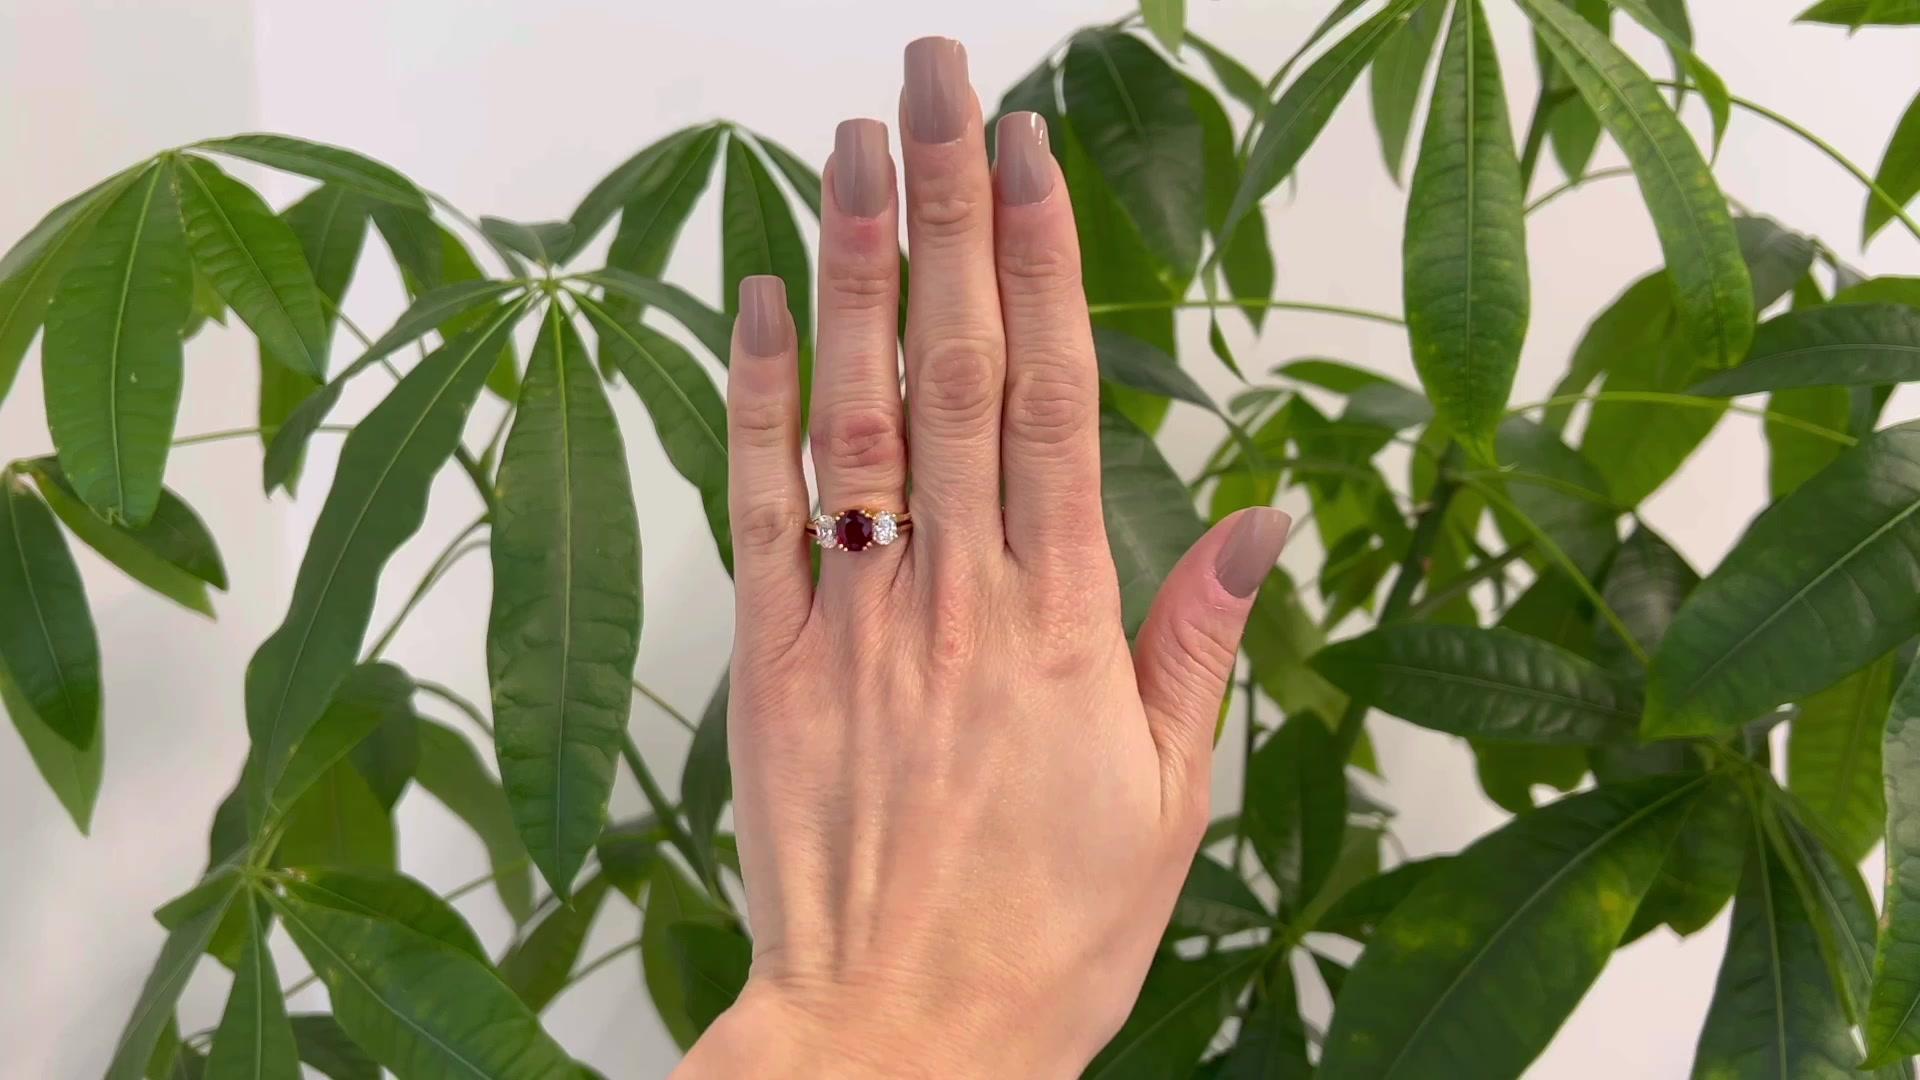 One Vintage Bucherer GIA Thailand Ruby Diamond 18 Karat Yellow Gold Three Stone Ring. Featuring one GIA oval mixed cut ruby weighing approximately 1.40 carats, accompanied with GIA #2221764333 stating the ruby is of Thailand origin. Accented by two